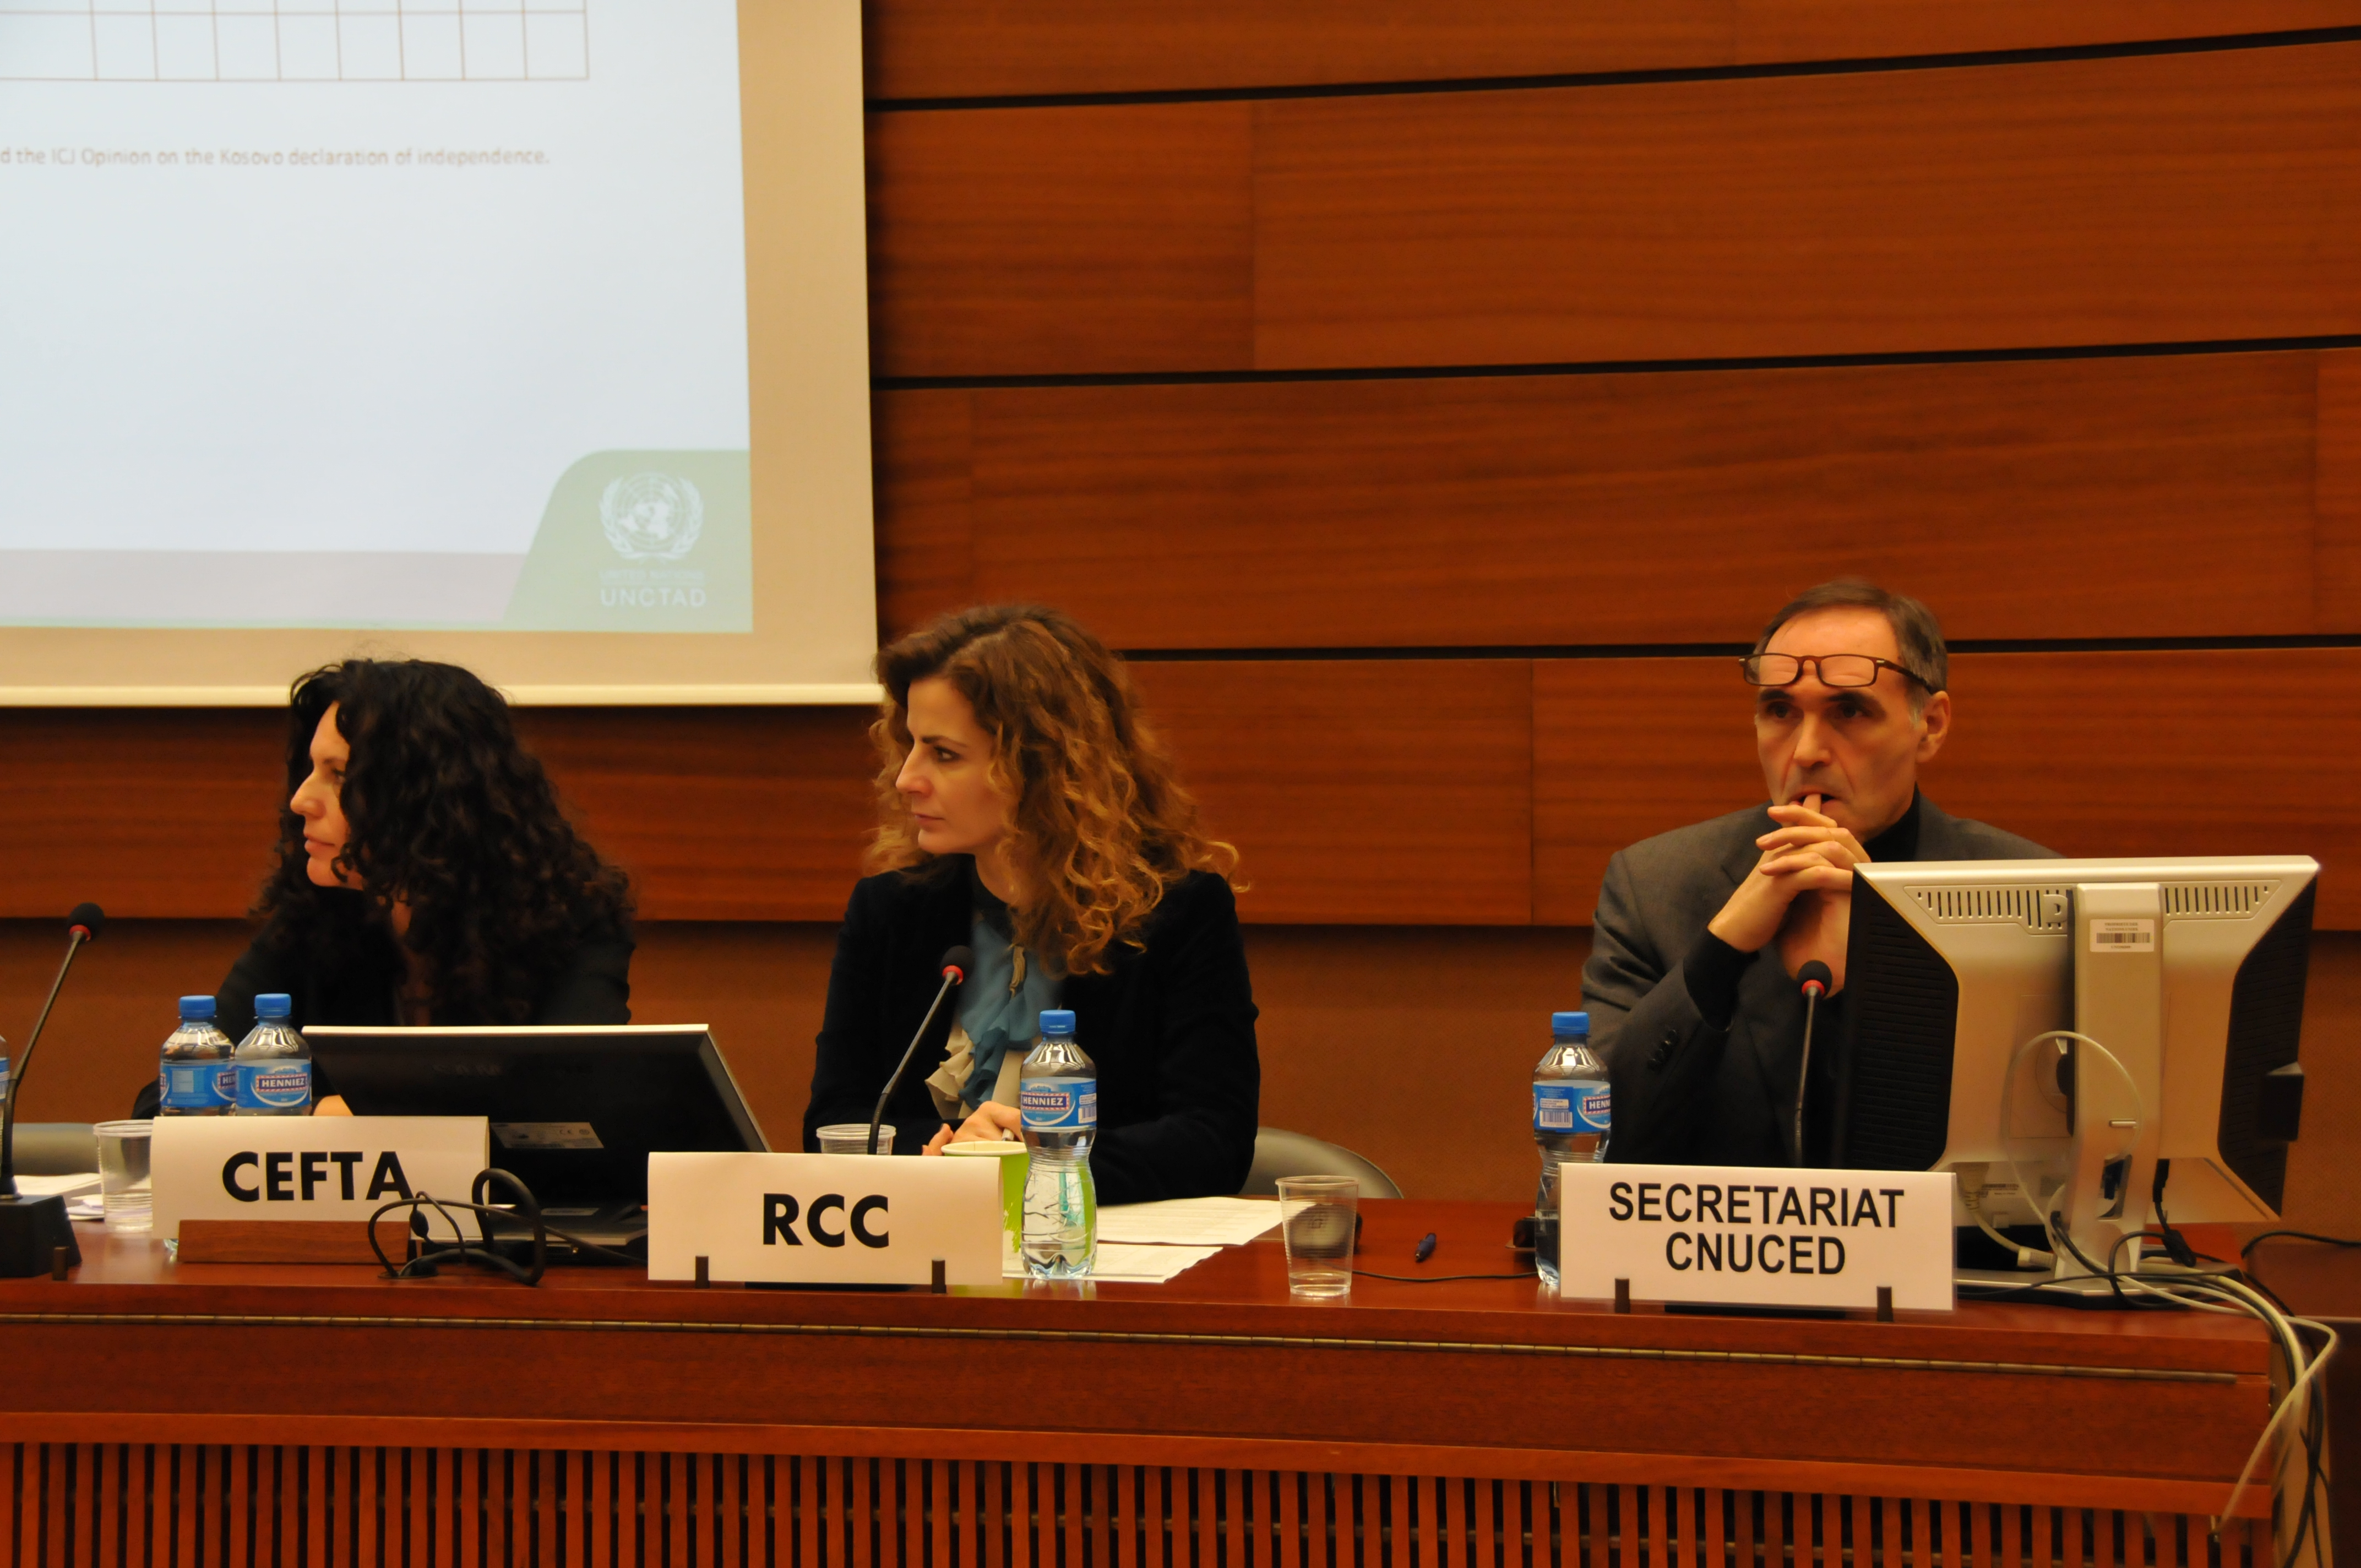 Reforming and harmonizing investment policies in South East Europe in focus of discussion on UNCTAD's Investment Policy Review of South East Europe on a meeting held in Geneva, Switzerland, on 17-18 November 2016 (Photo: Jovan Licina) 